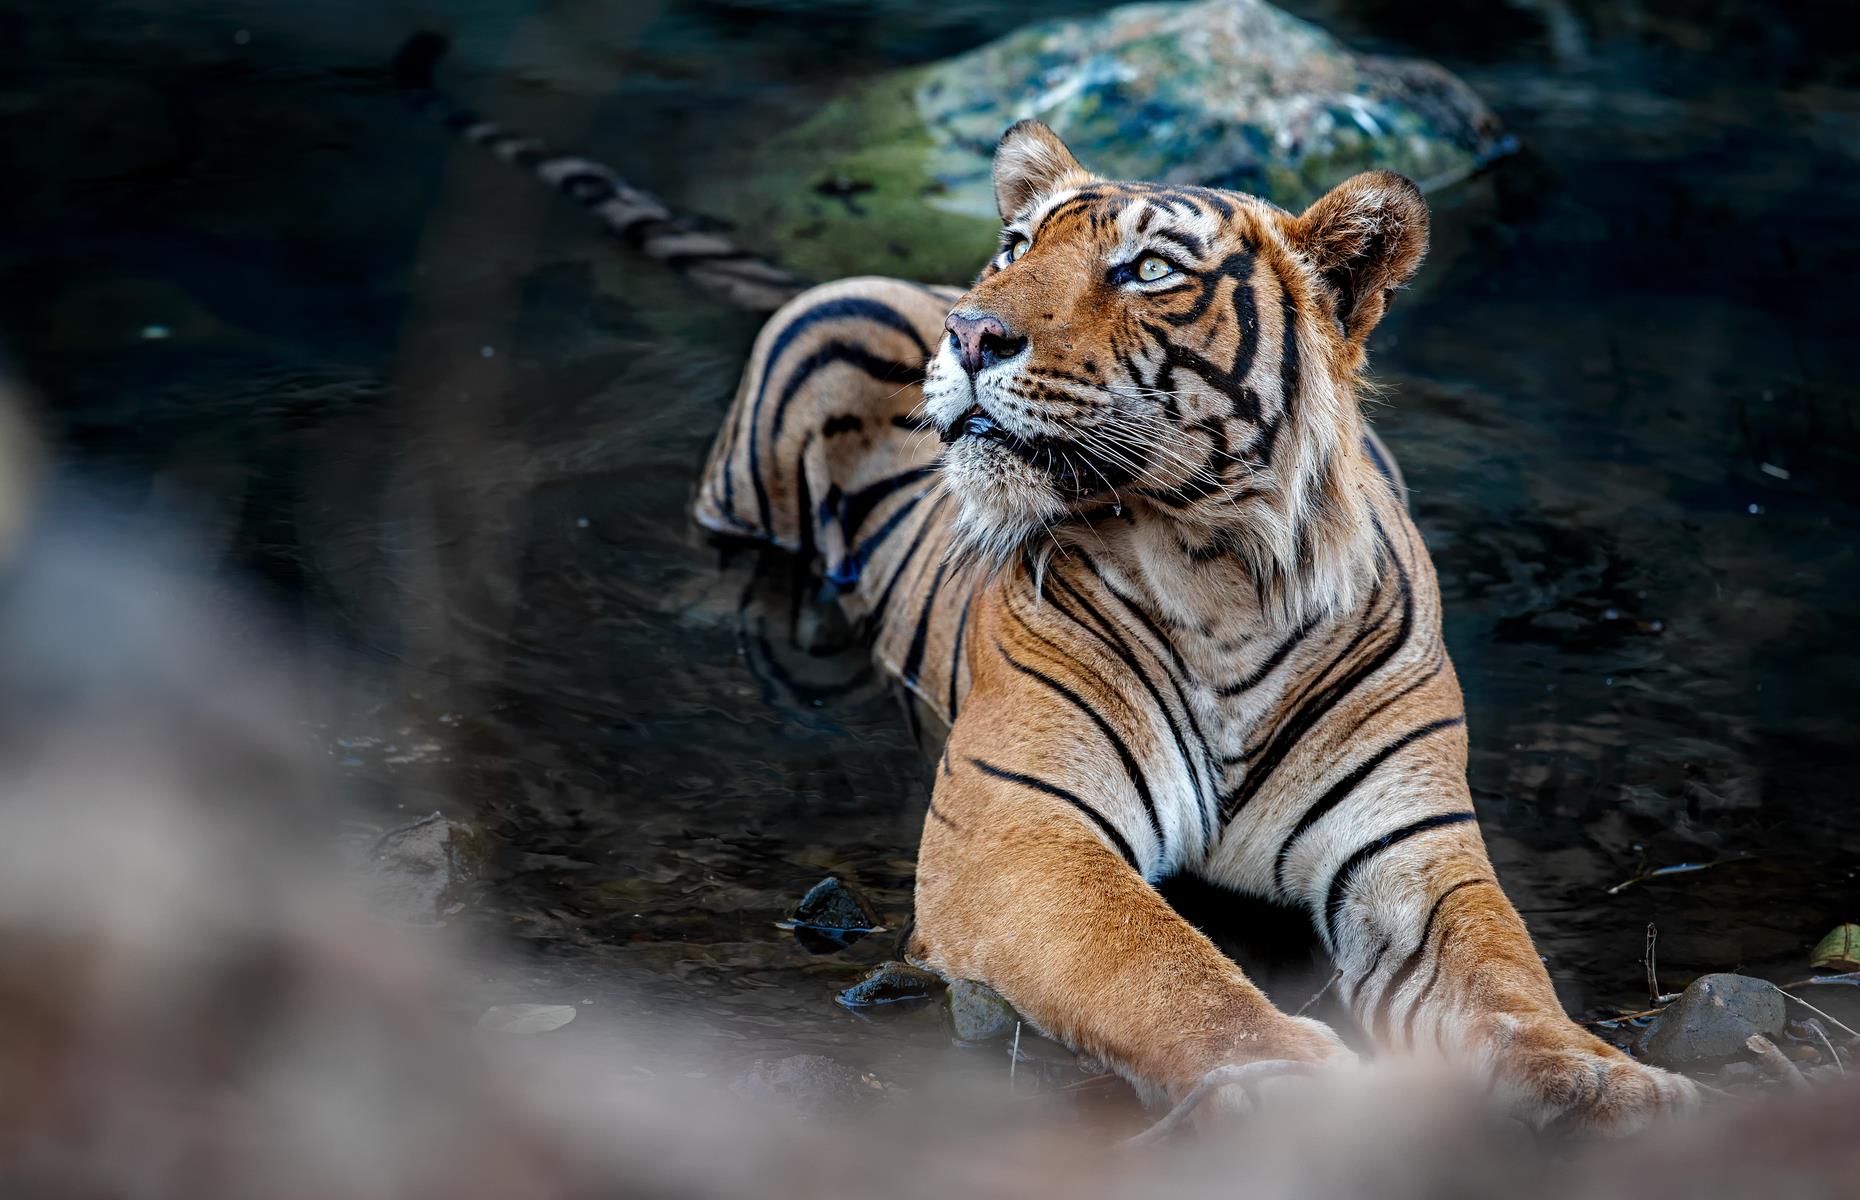 <p>India’s tiger population has increased by 200 specimens in the last four years, bringing the animal back from the brink of extinction. Conservation-focused trips with tour operators such as <a href="https://www.steppestravel.com/holiday-types/wildlife/big-cats/tiger-safaris/">Steppes</a> allow you to observe the predators, set camera traps and learn tracking skills.</p>  <p><a href="https://www.loveexploring.com/gallerylist/154853/these-iconic-animals-were-extinct-then-conservationists-brought-them-back"><strong>Now discover the animals that were almost extinct – before conservationists brought them back</strong></a></p>